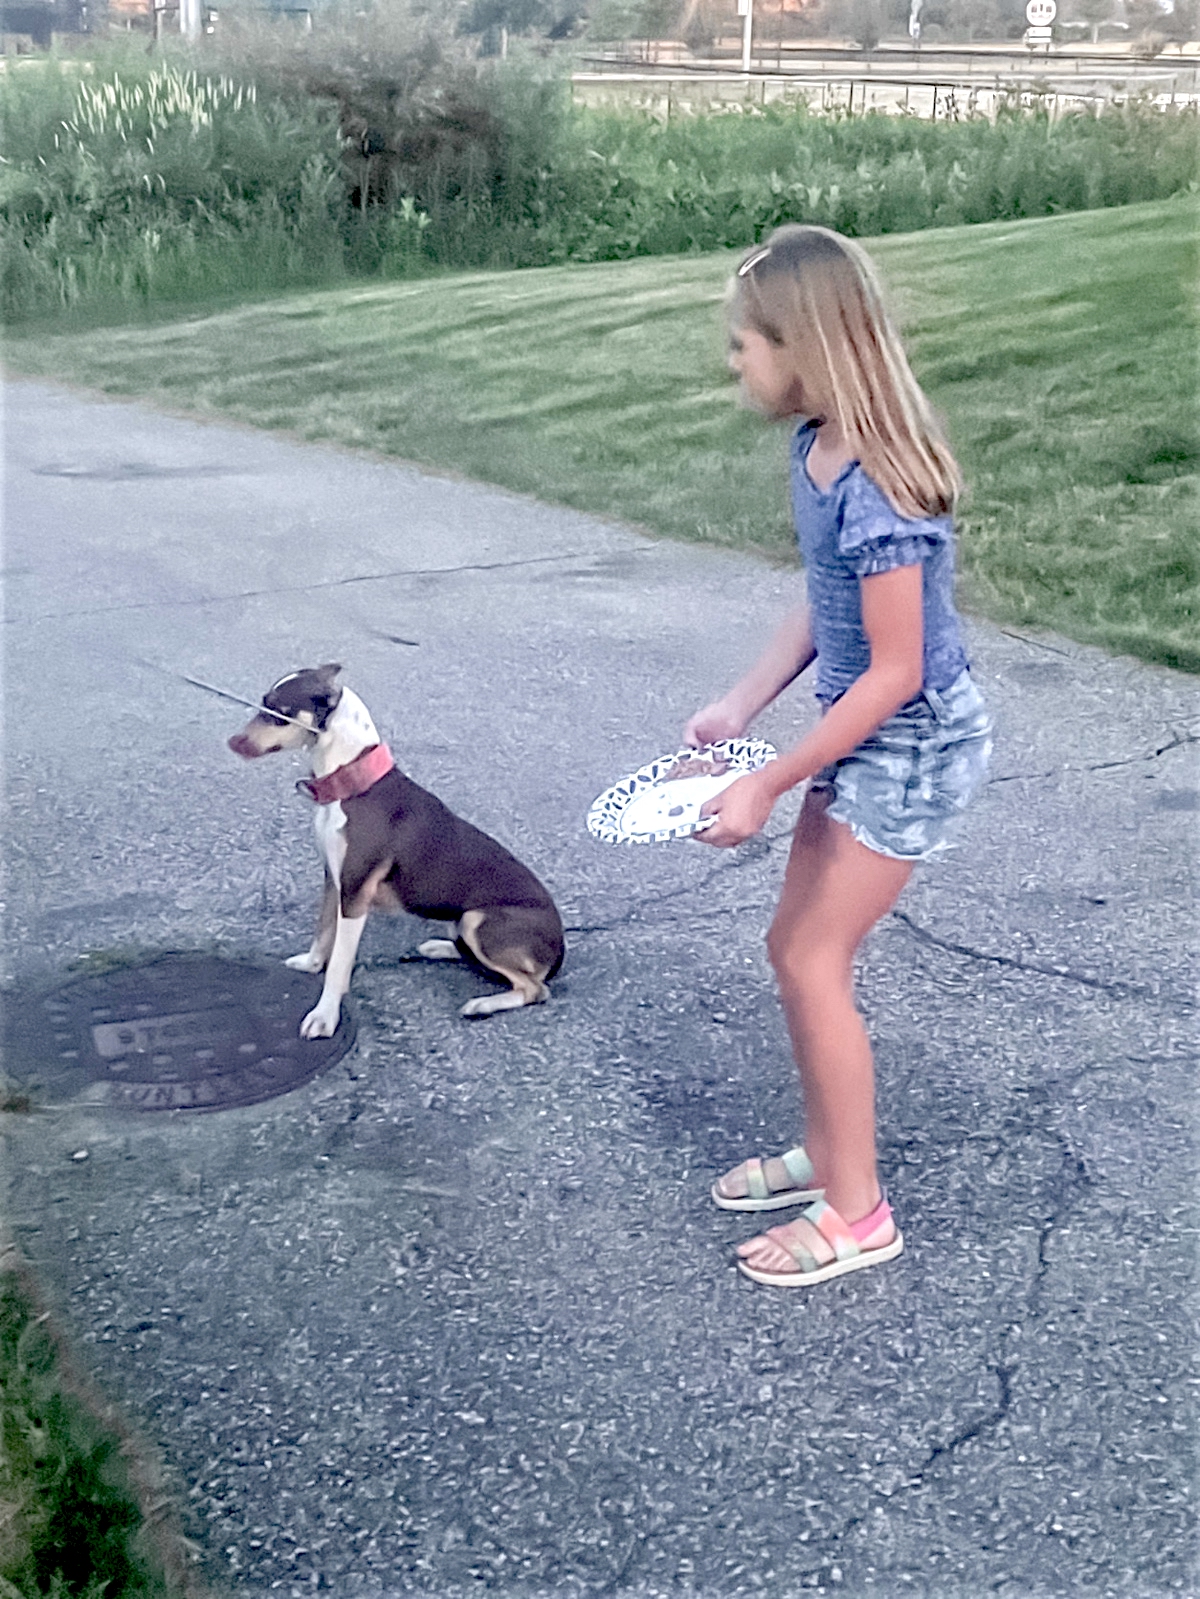 Ten-year-old Lily Chrzanowski attempts to lead the lost dog to safety. (Photo provided)